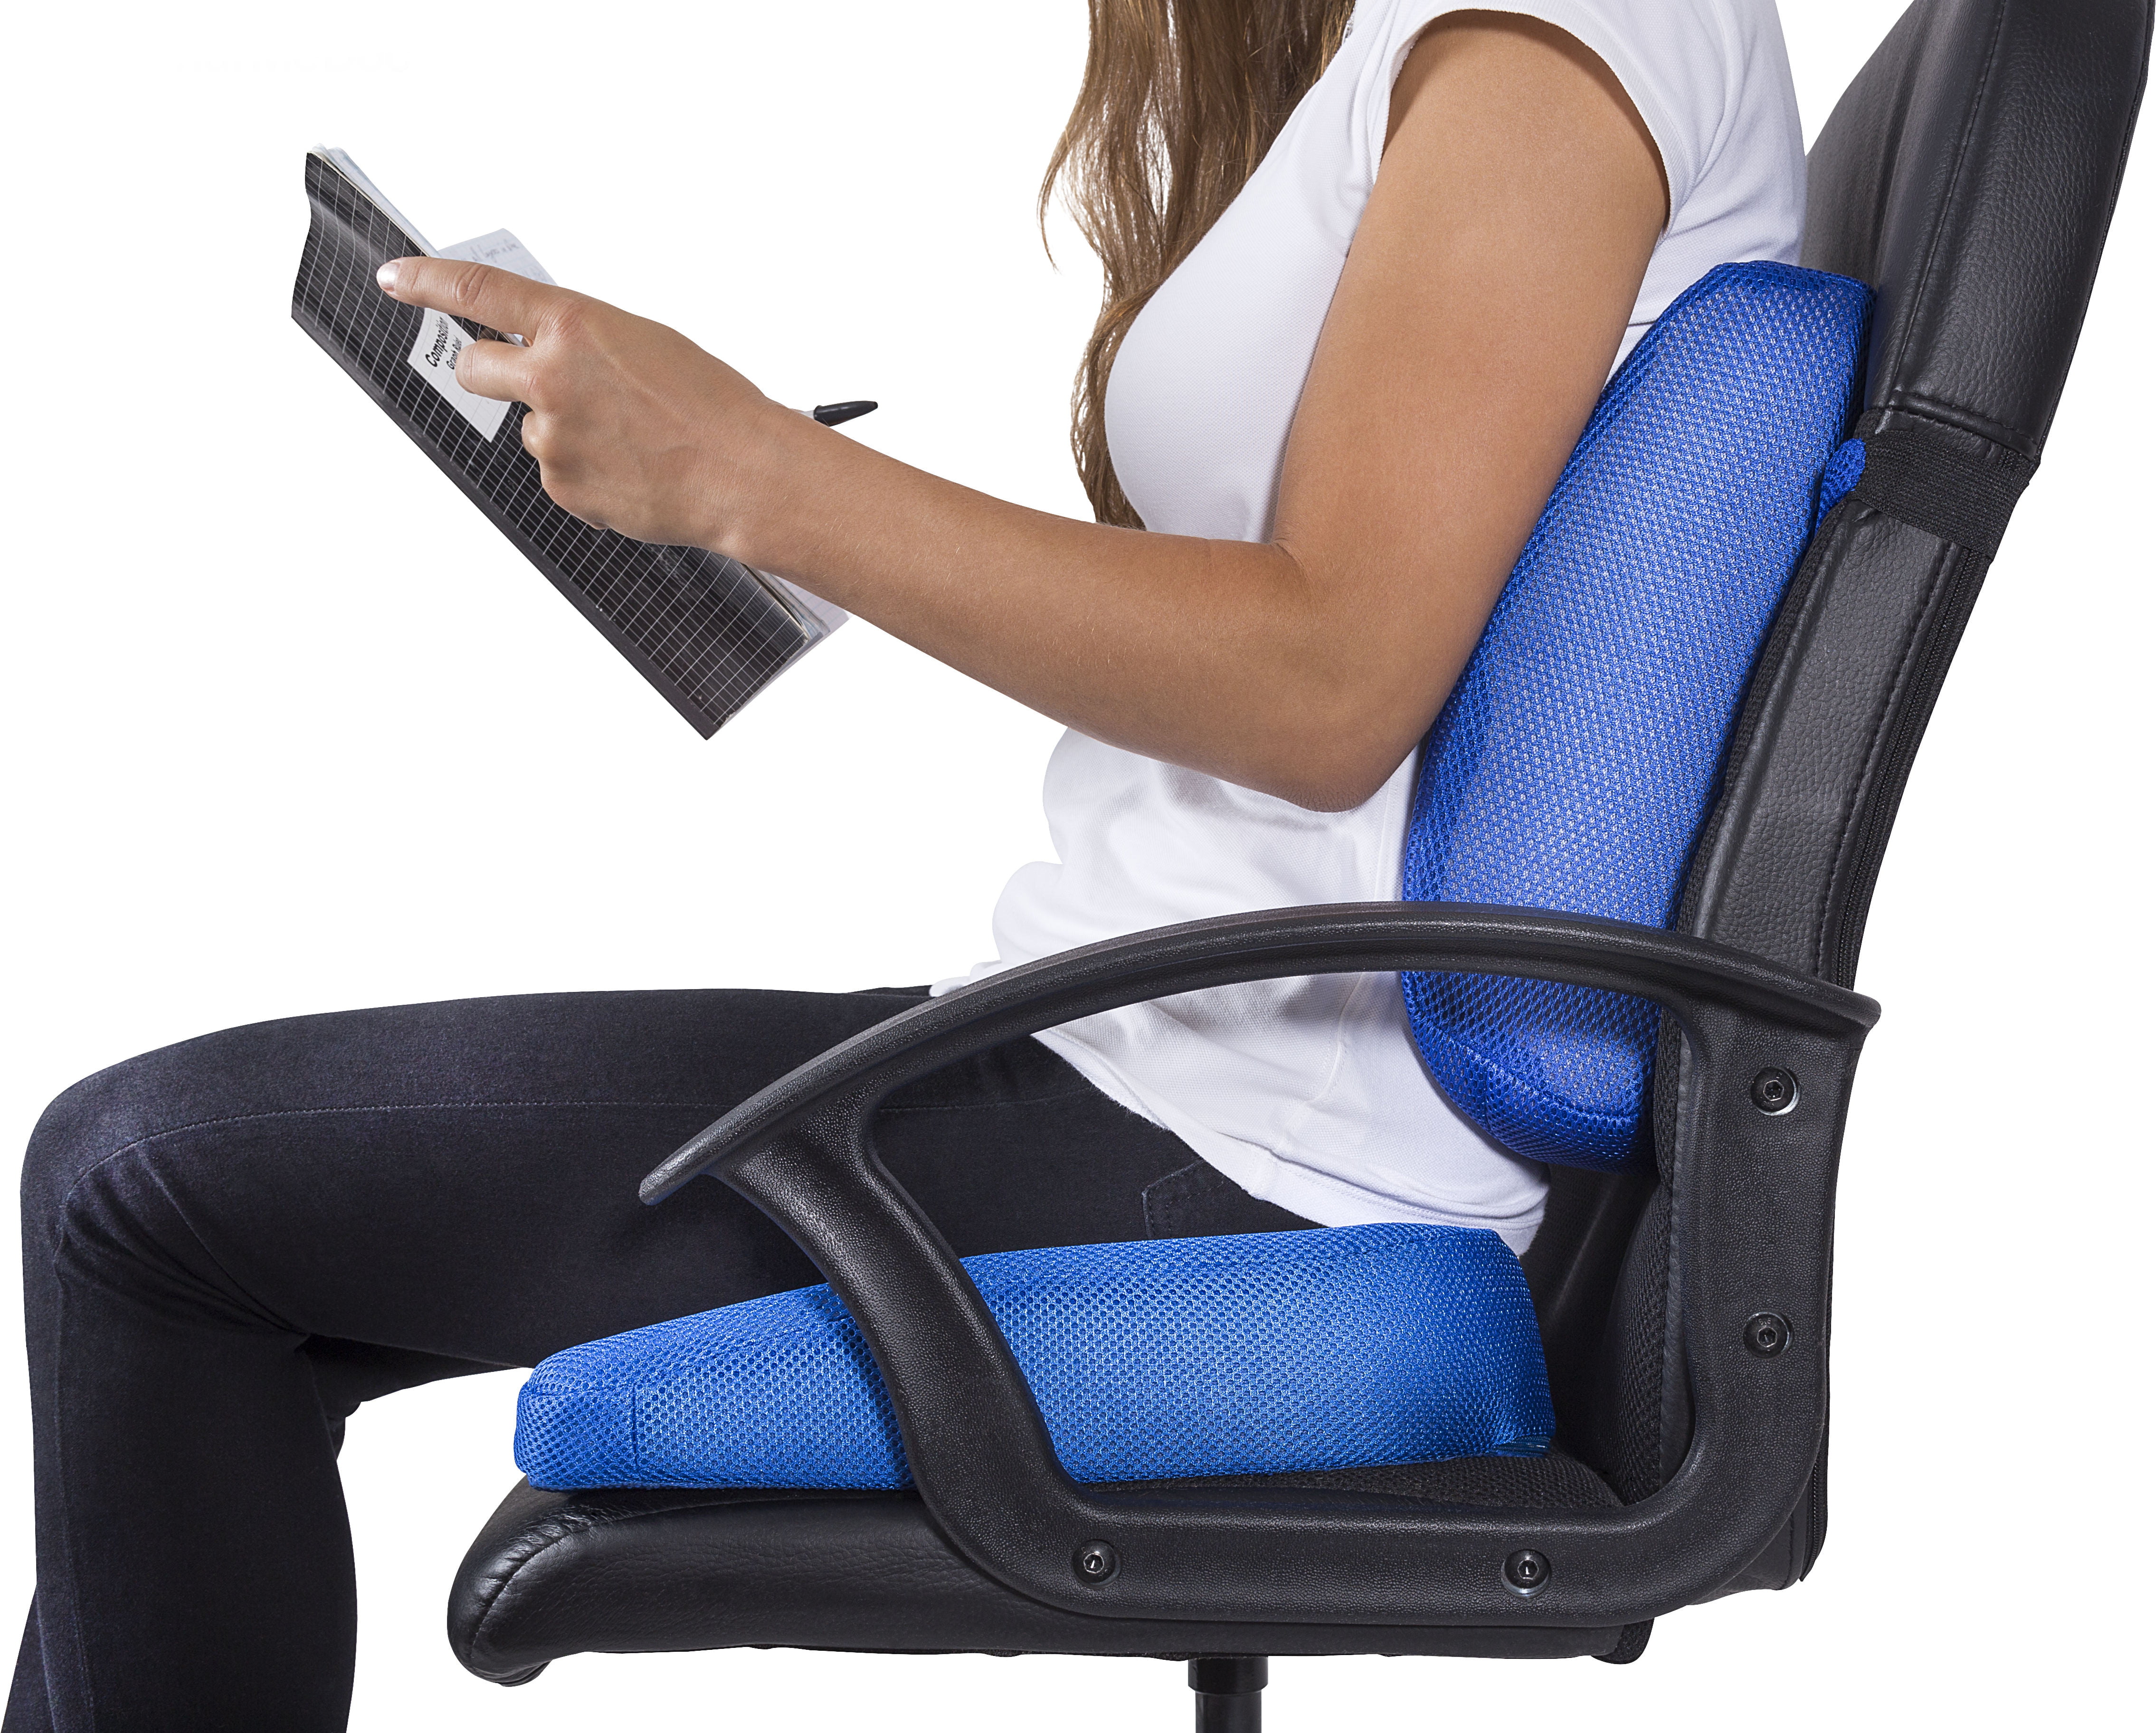 therapeutic cushions for chairs